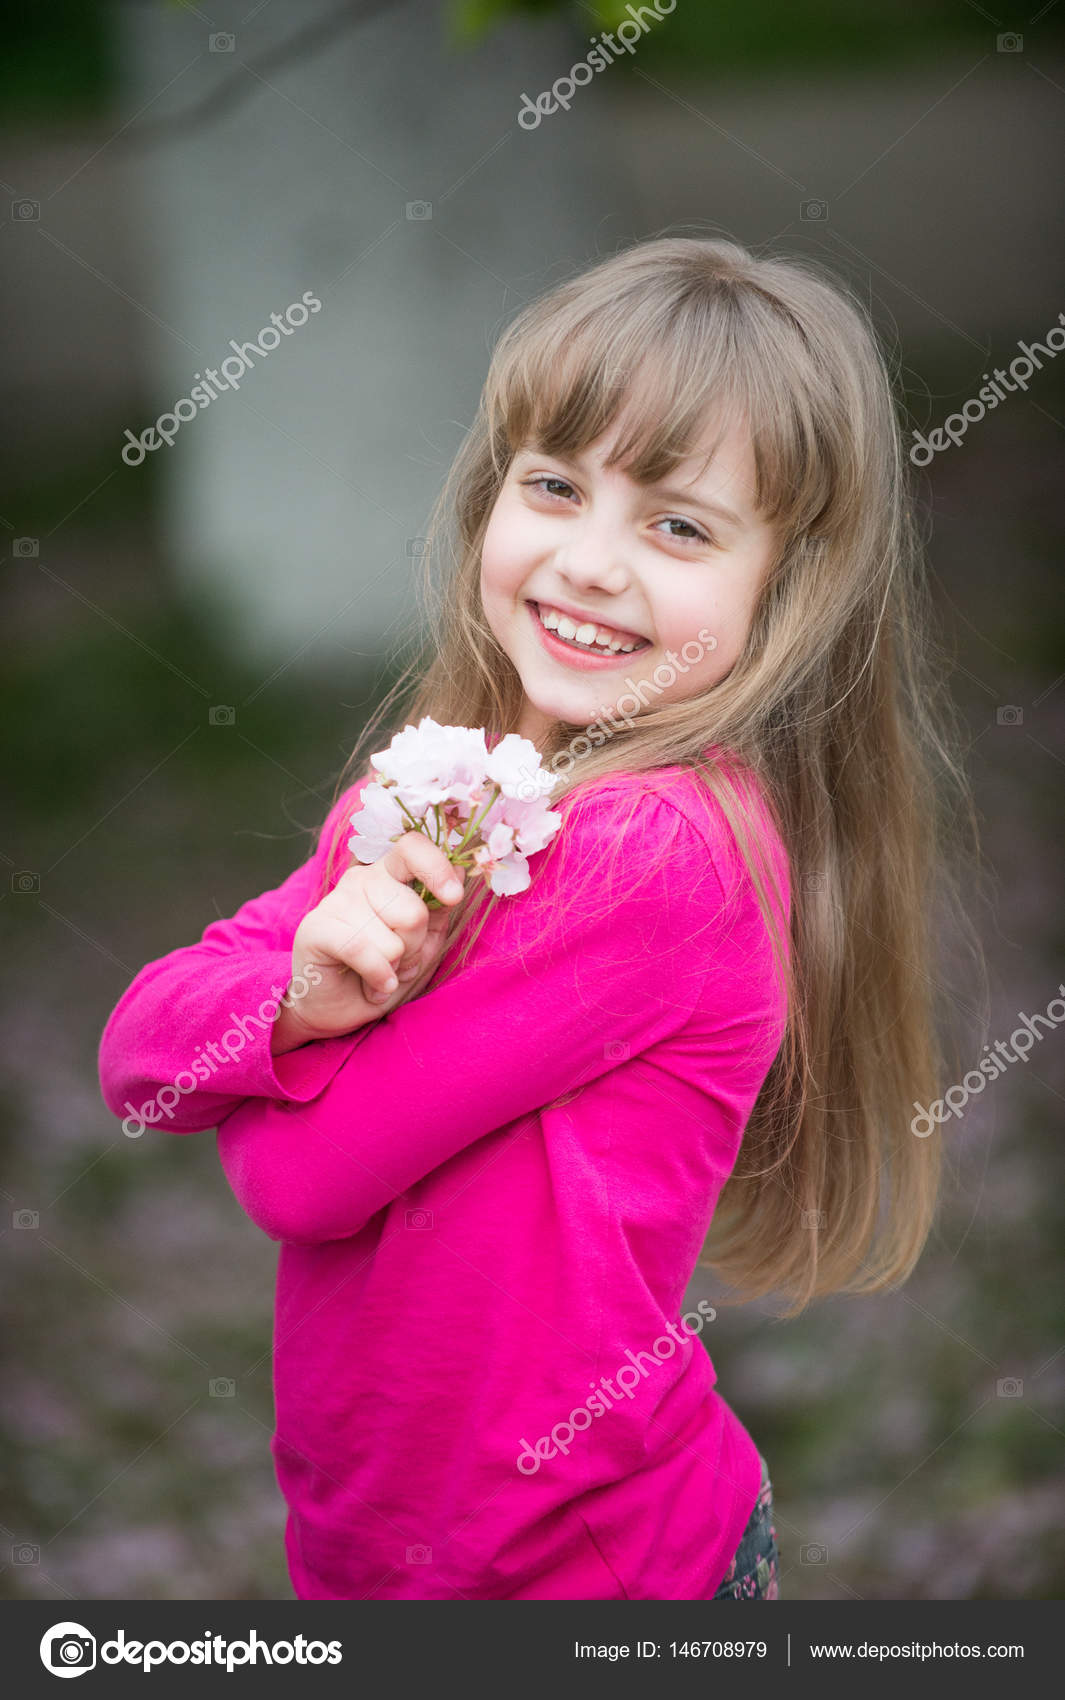 Small baby girl with smiling face holding pink sakura blossom ...